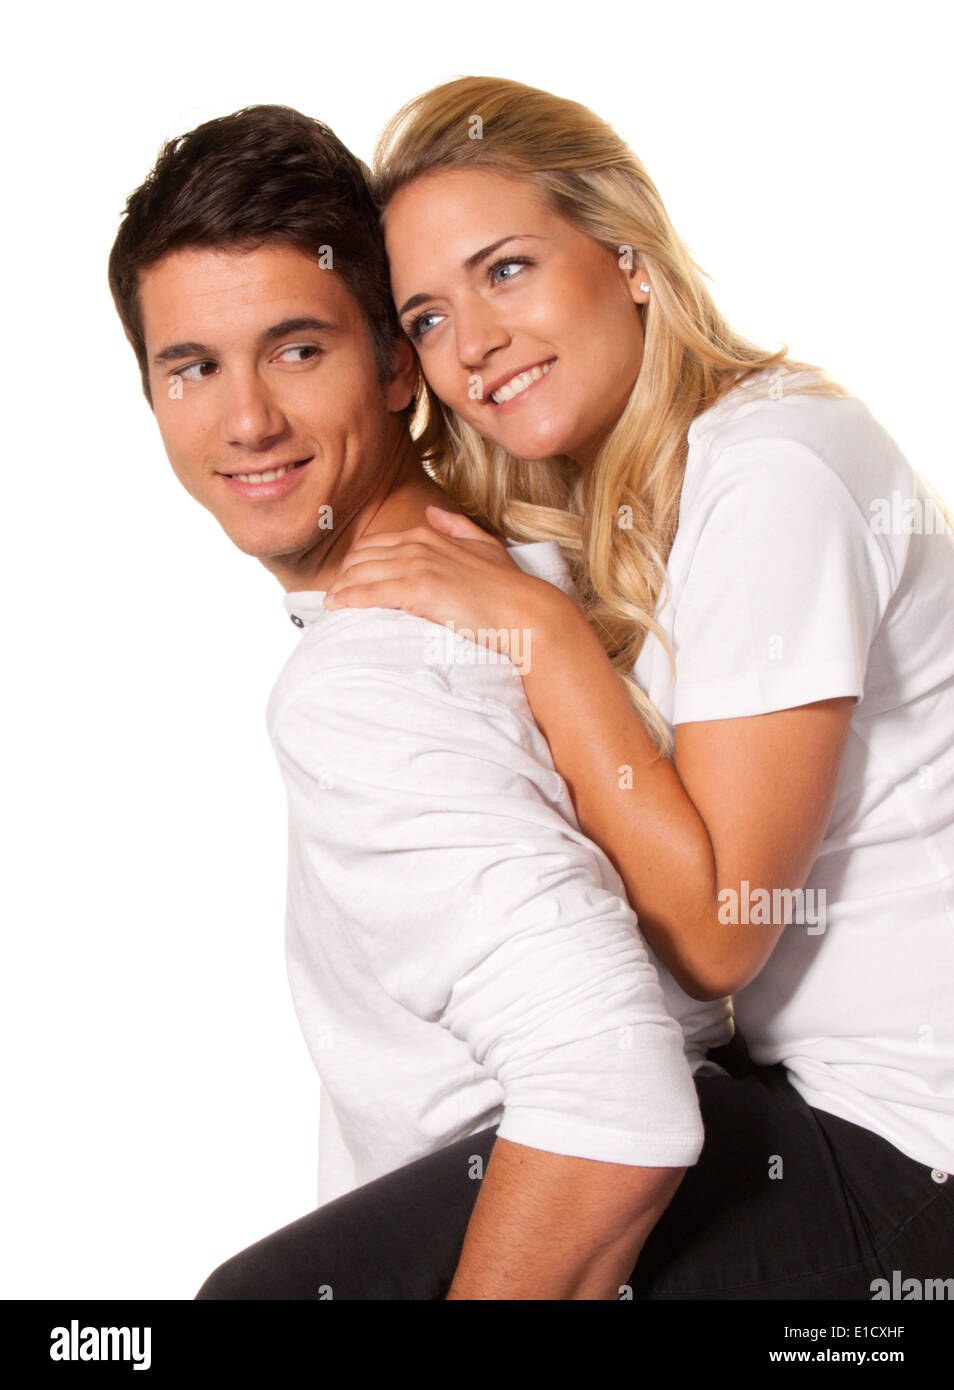 A smiling young couple having fun and joy Stock Photo